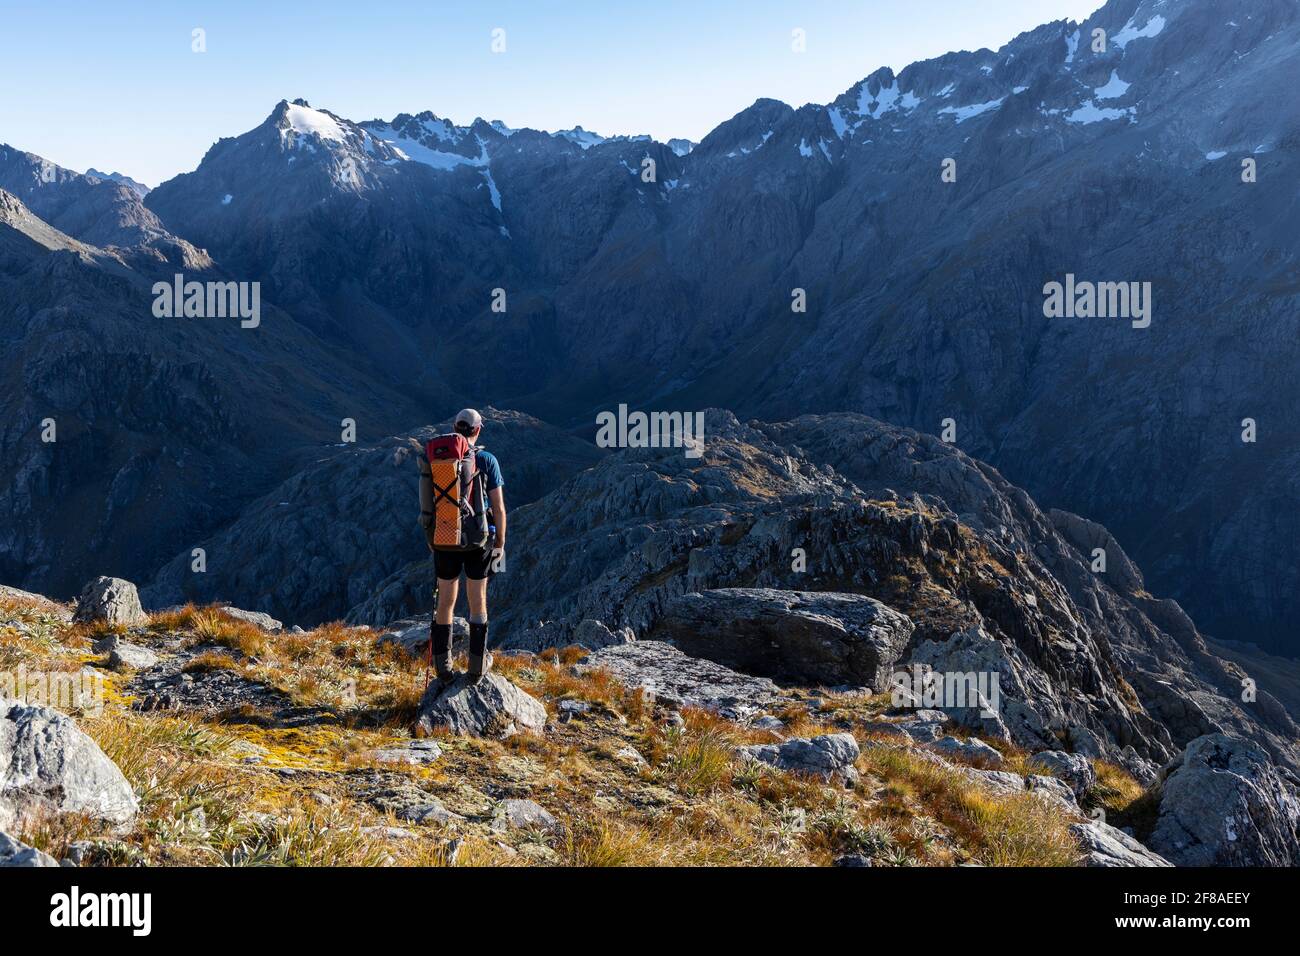 Hiker in Southern Alps, New Zealand Stock Photo